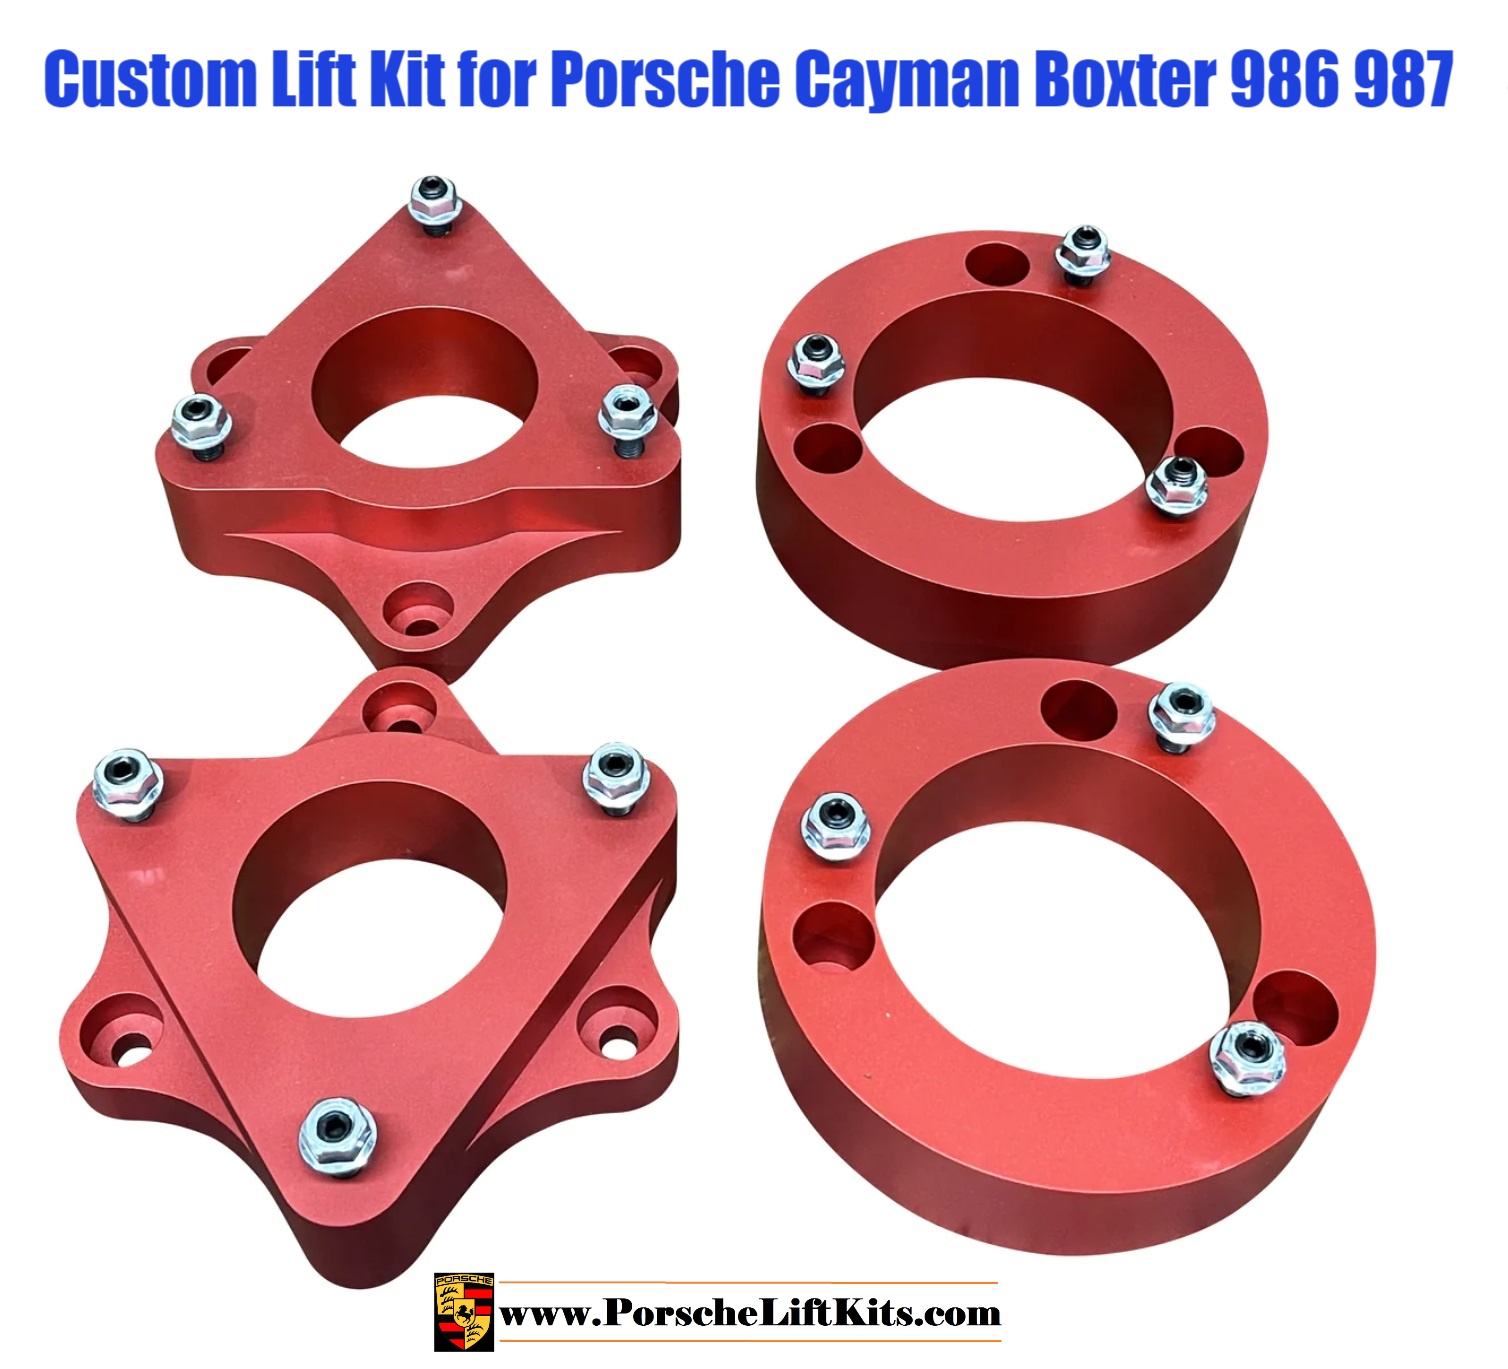 Two Inch Lift Kit for 2005-2010 Porsche Cayman 987 and 1996-2010 Boxster 986 987 $895 USD